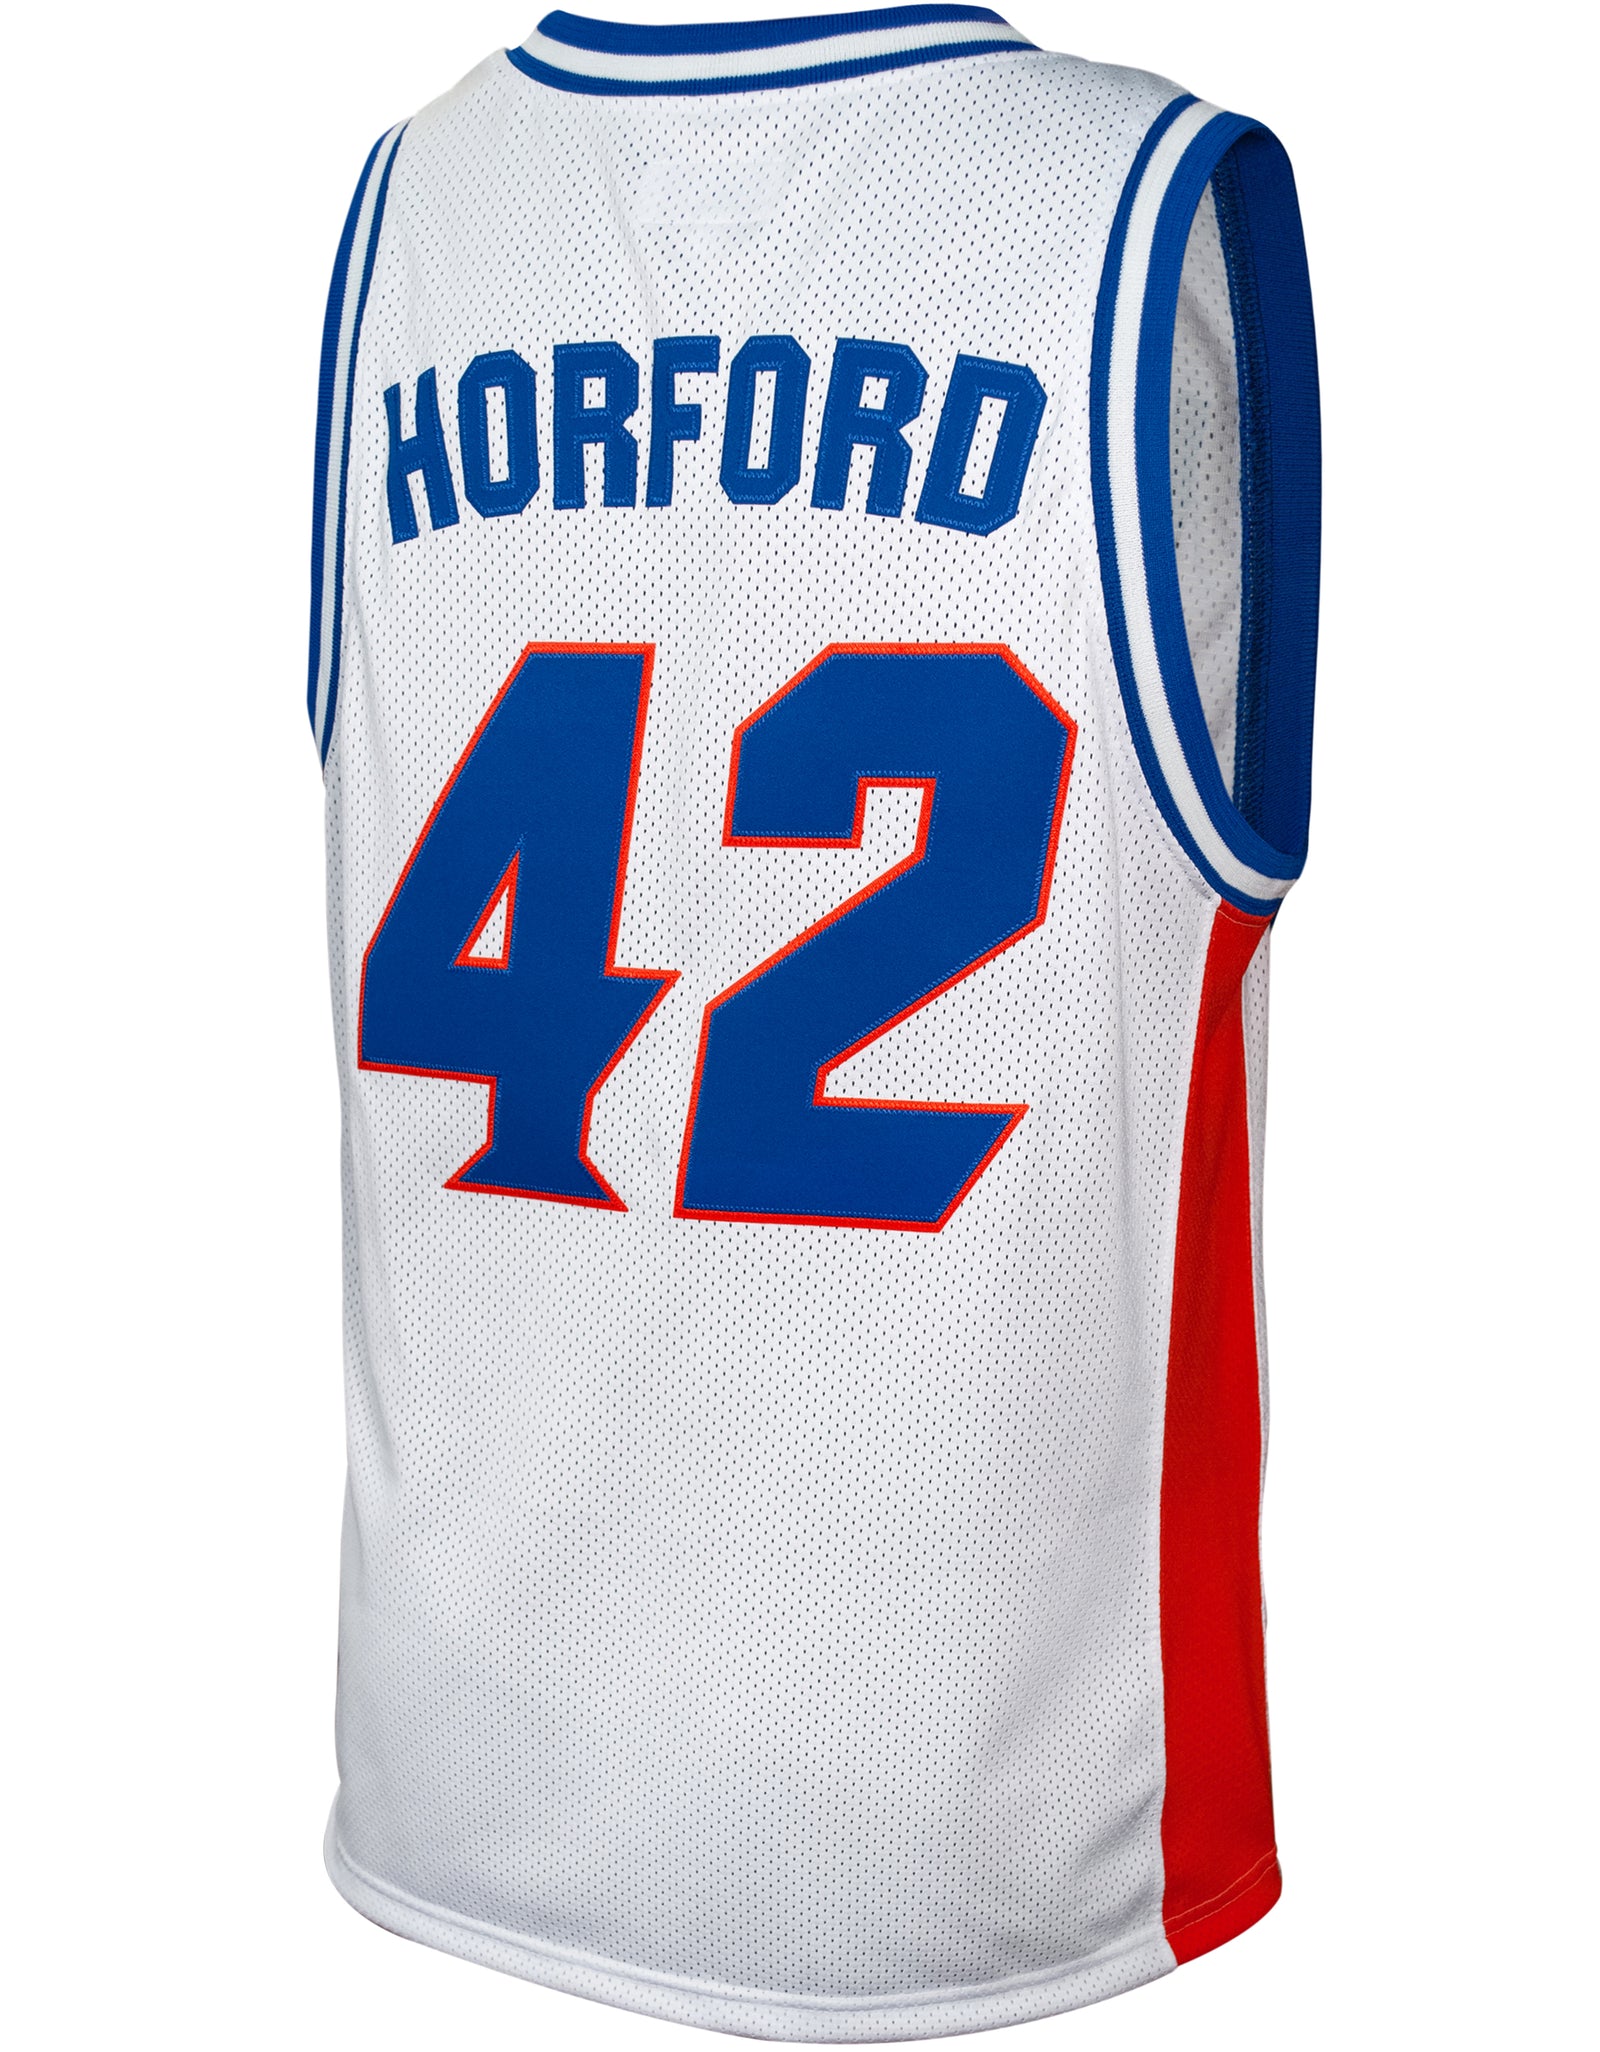 NBA Throwback Jersey Gift Guide For All 30 Teams - Page 19